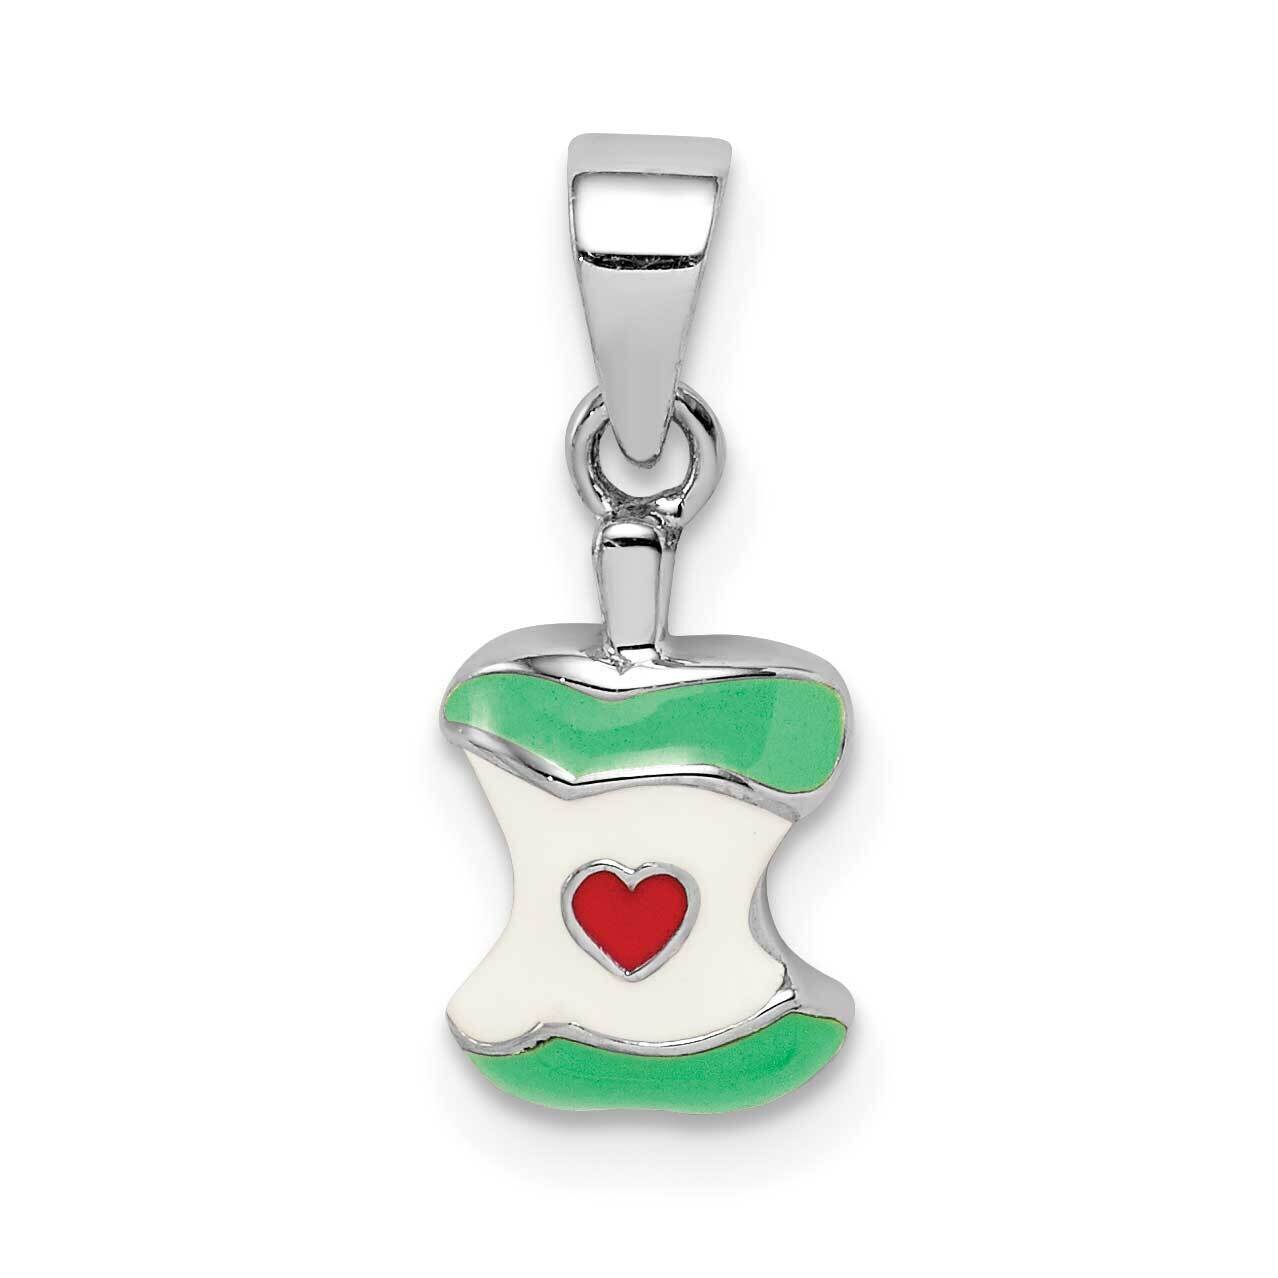 Childs Enameled Apple Core Pendant Sterling Silver Rhodium-plated QC9652